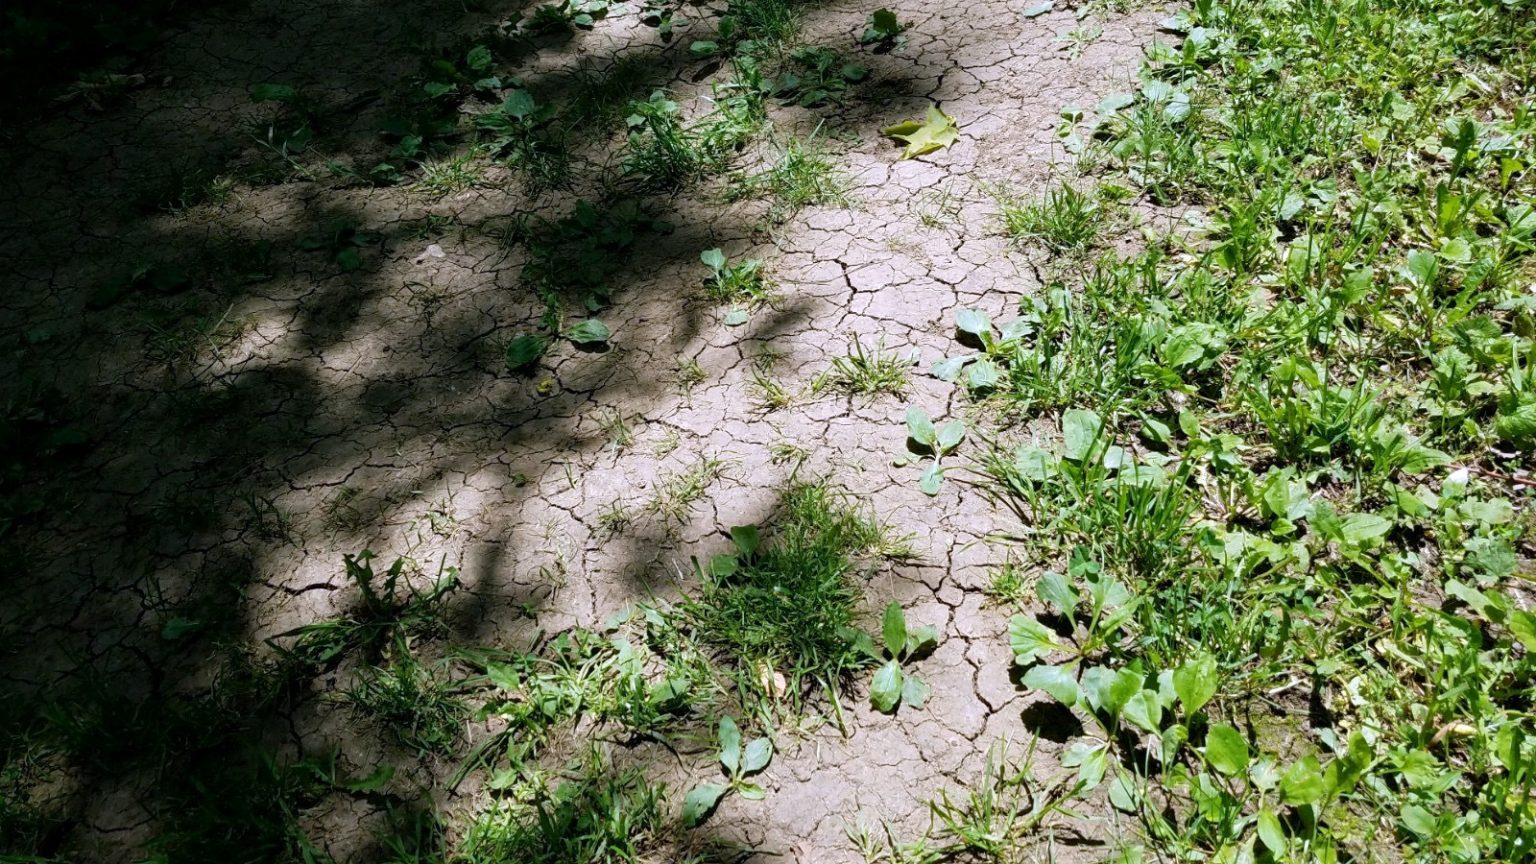 Cracks in dry soil on footpath surrounded by green grass and weeds